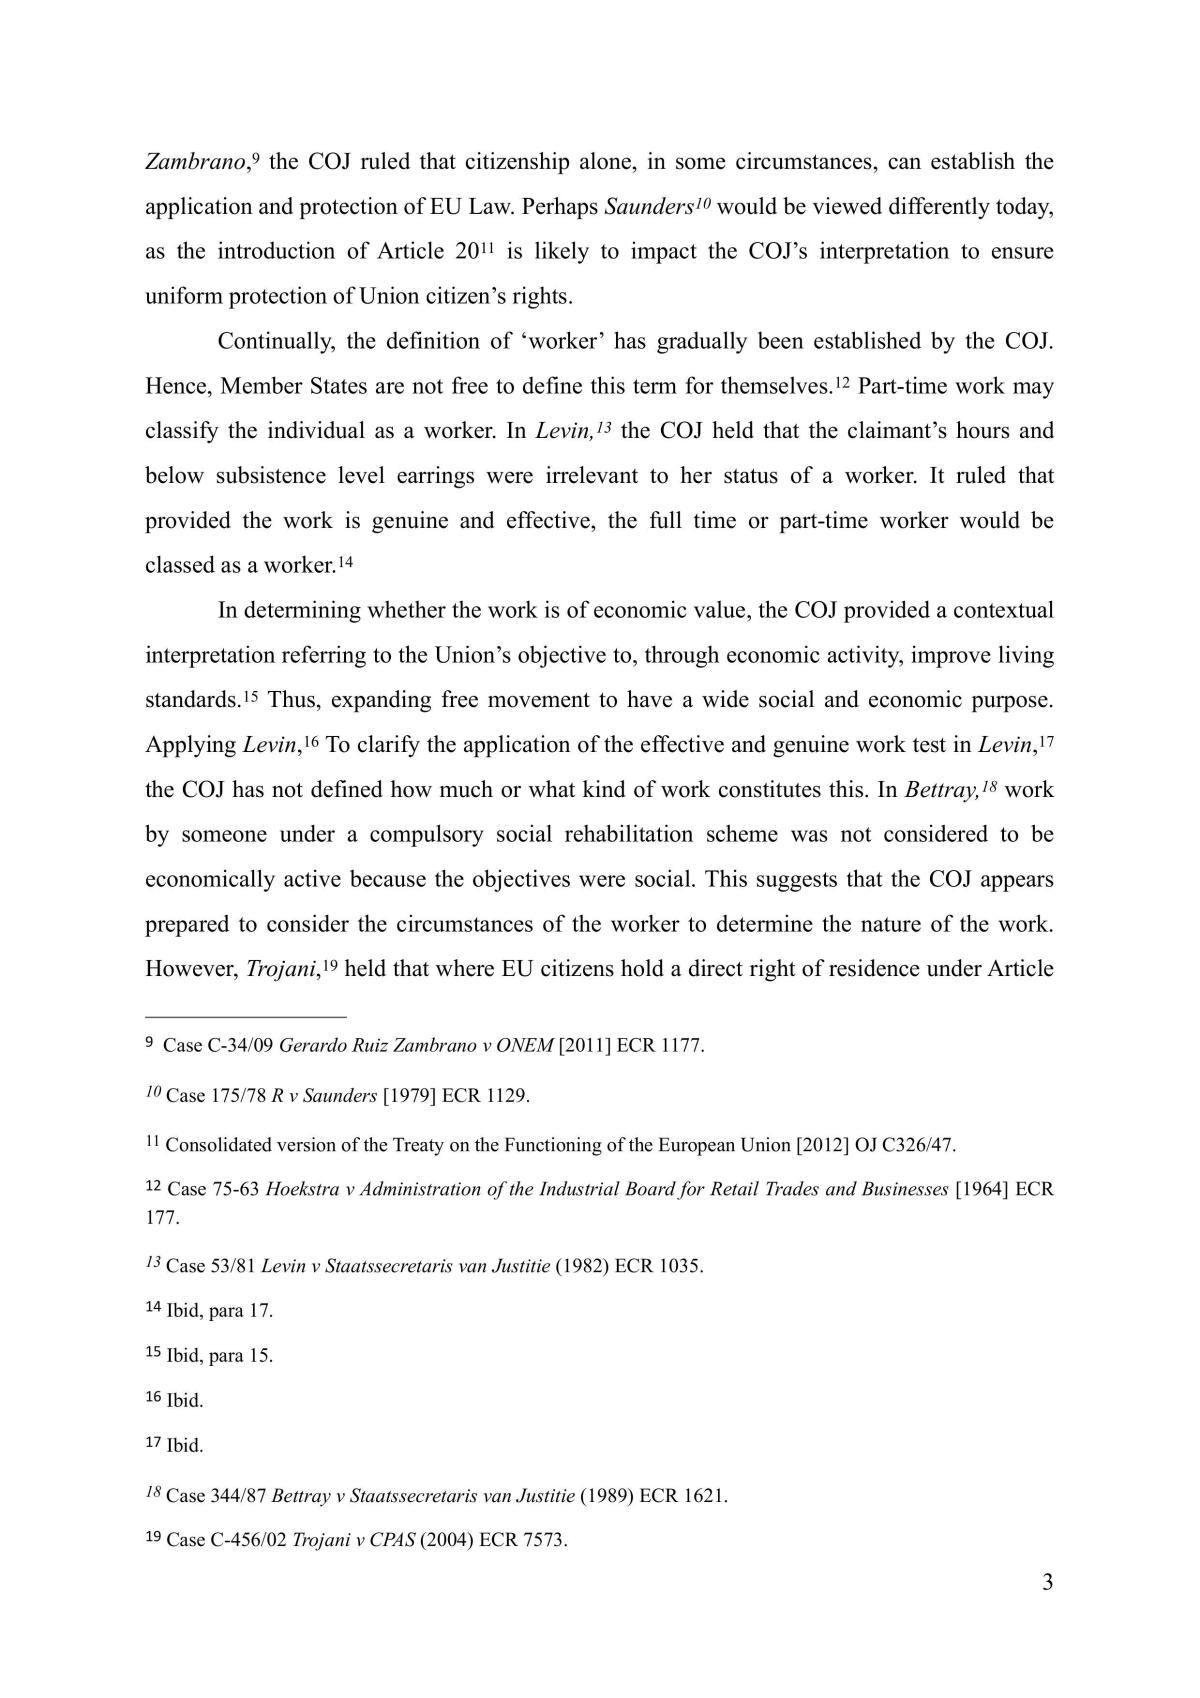 Legal issues concerning the establishment of EU worker status under the EU principle of freedom of movement.  - Page 3